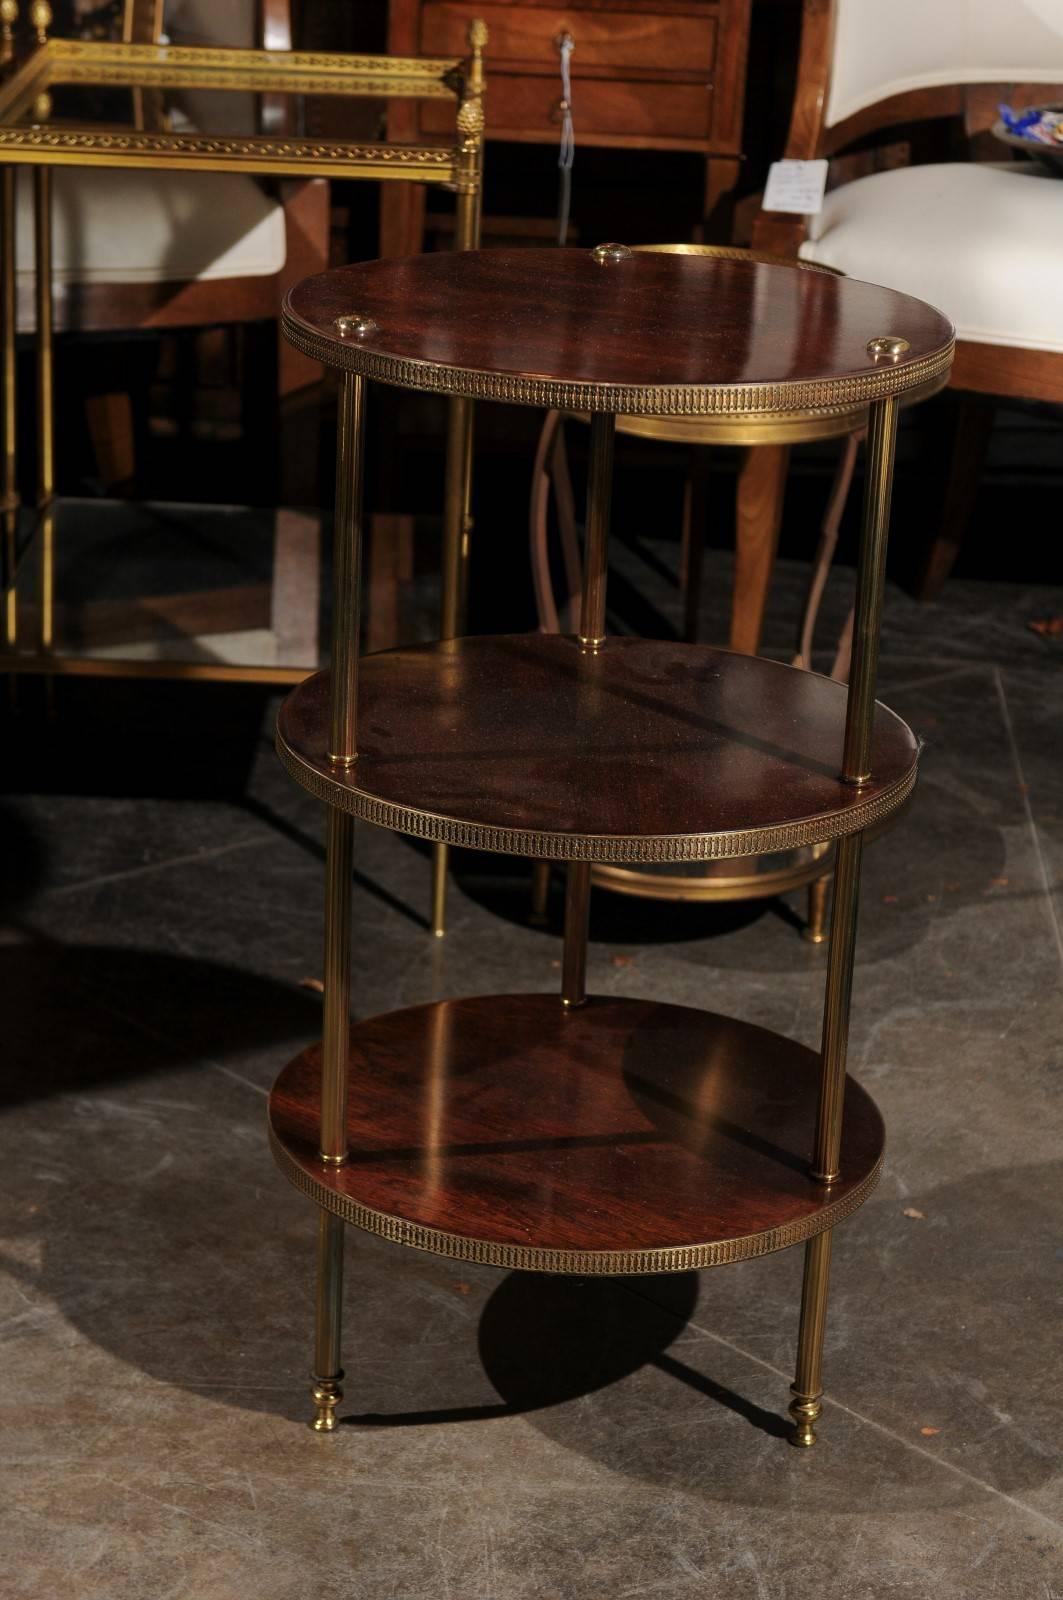 A vintage Italian three-tiered wood and brass stand from the midcentury. This Italian stand features three circular wooden shelves with fluted brass molding. Each shelf is secured to three brass supports, running from the top to the bottom of the